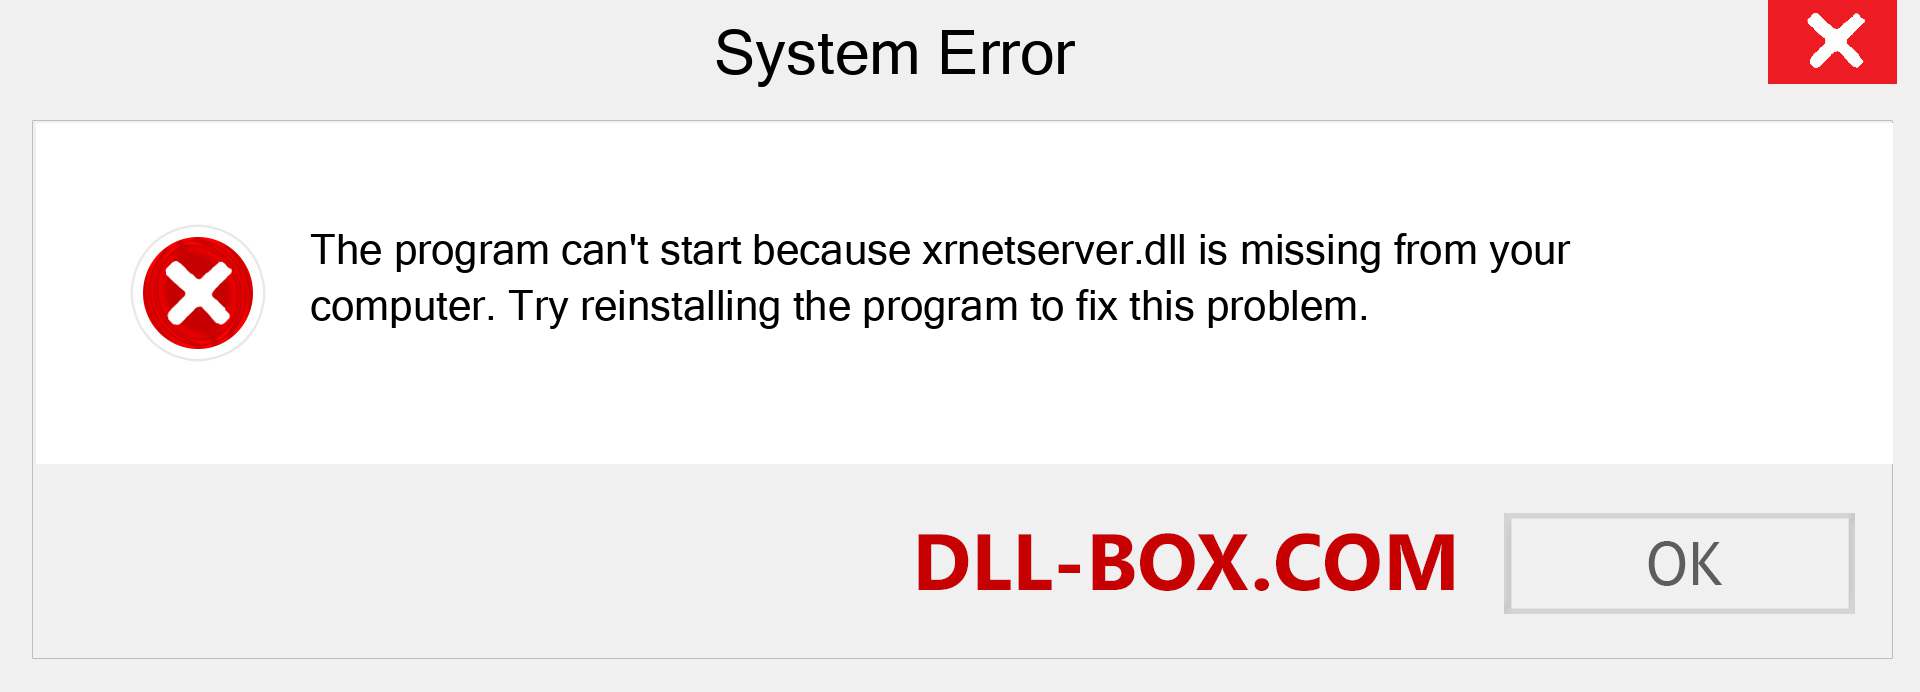  xrnetserver.dll file is missing?. Download for Windows 7, 8, 10 - Fix  xrnetserver dll Missing Error on Windows, photos, images